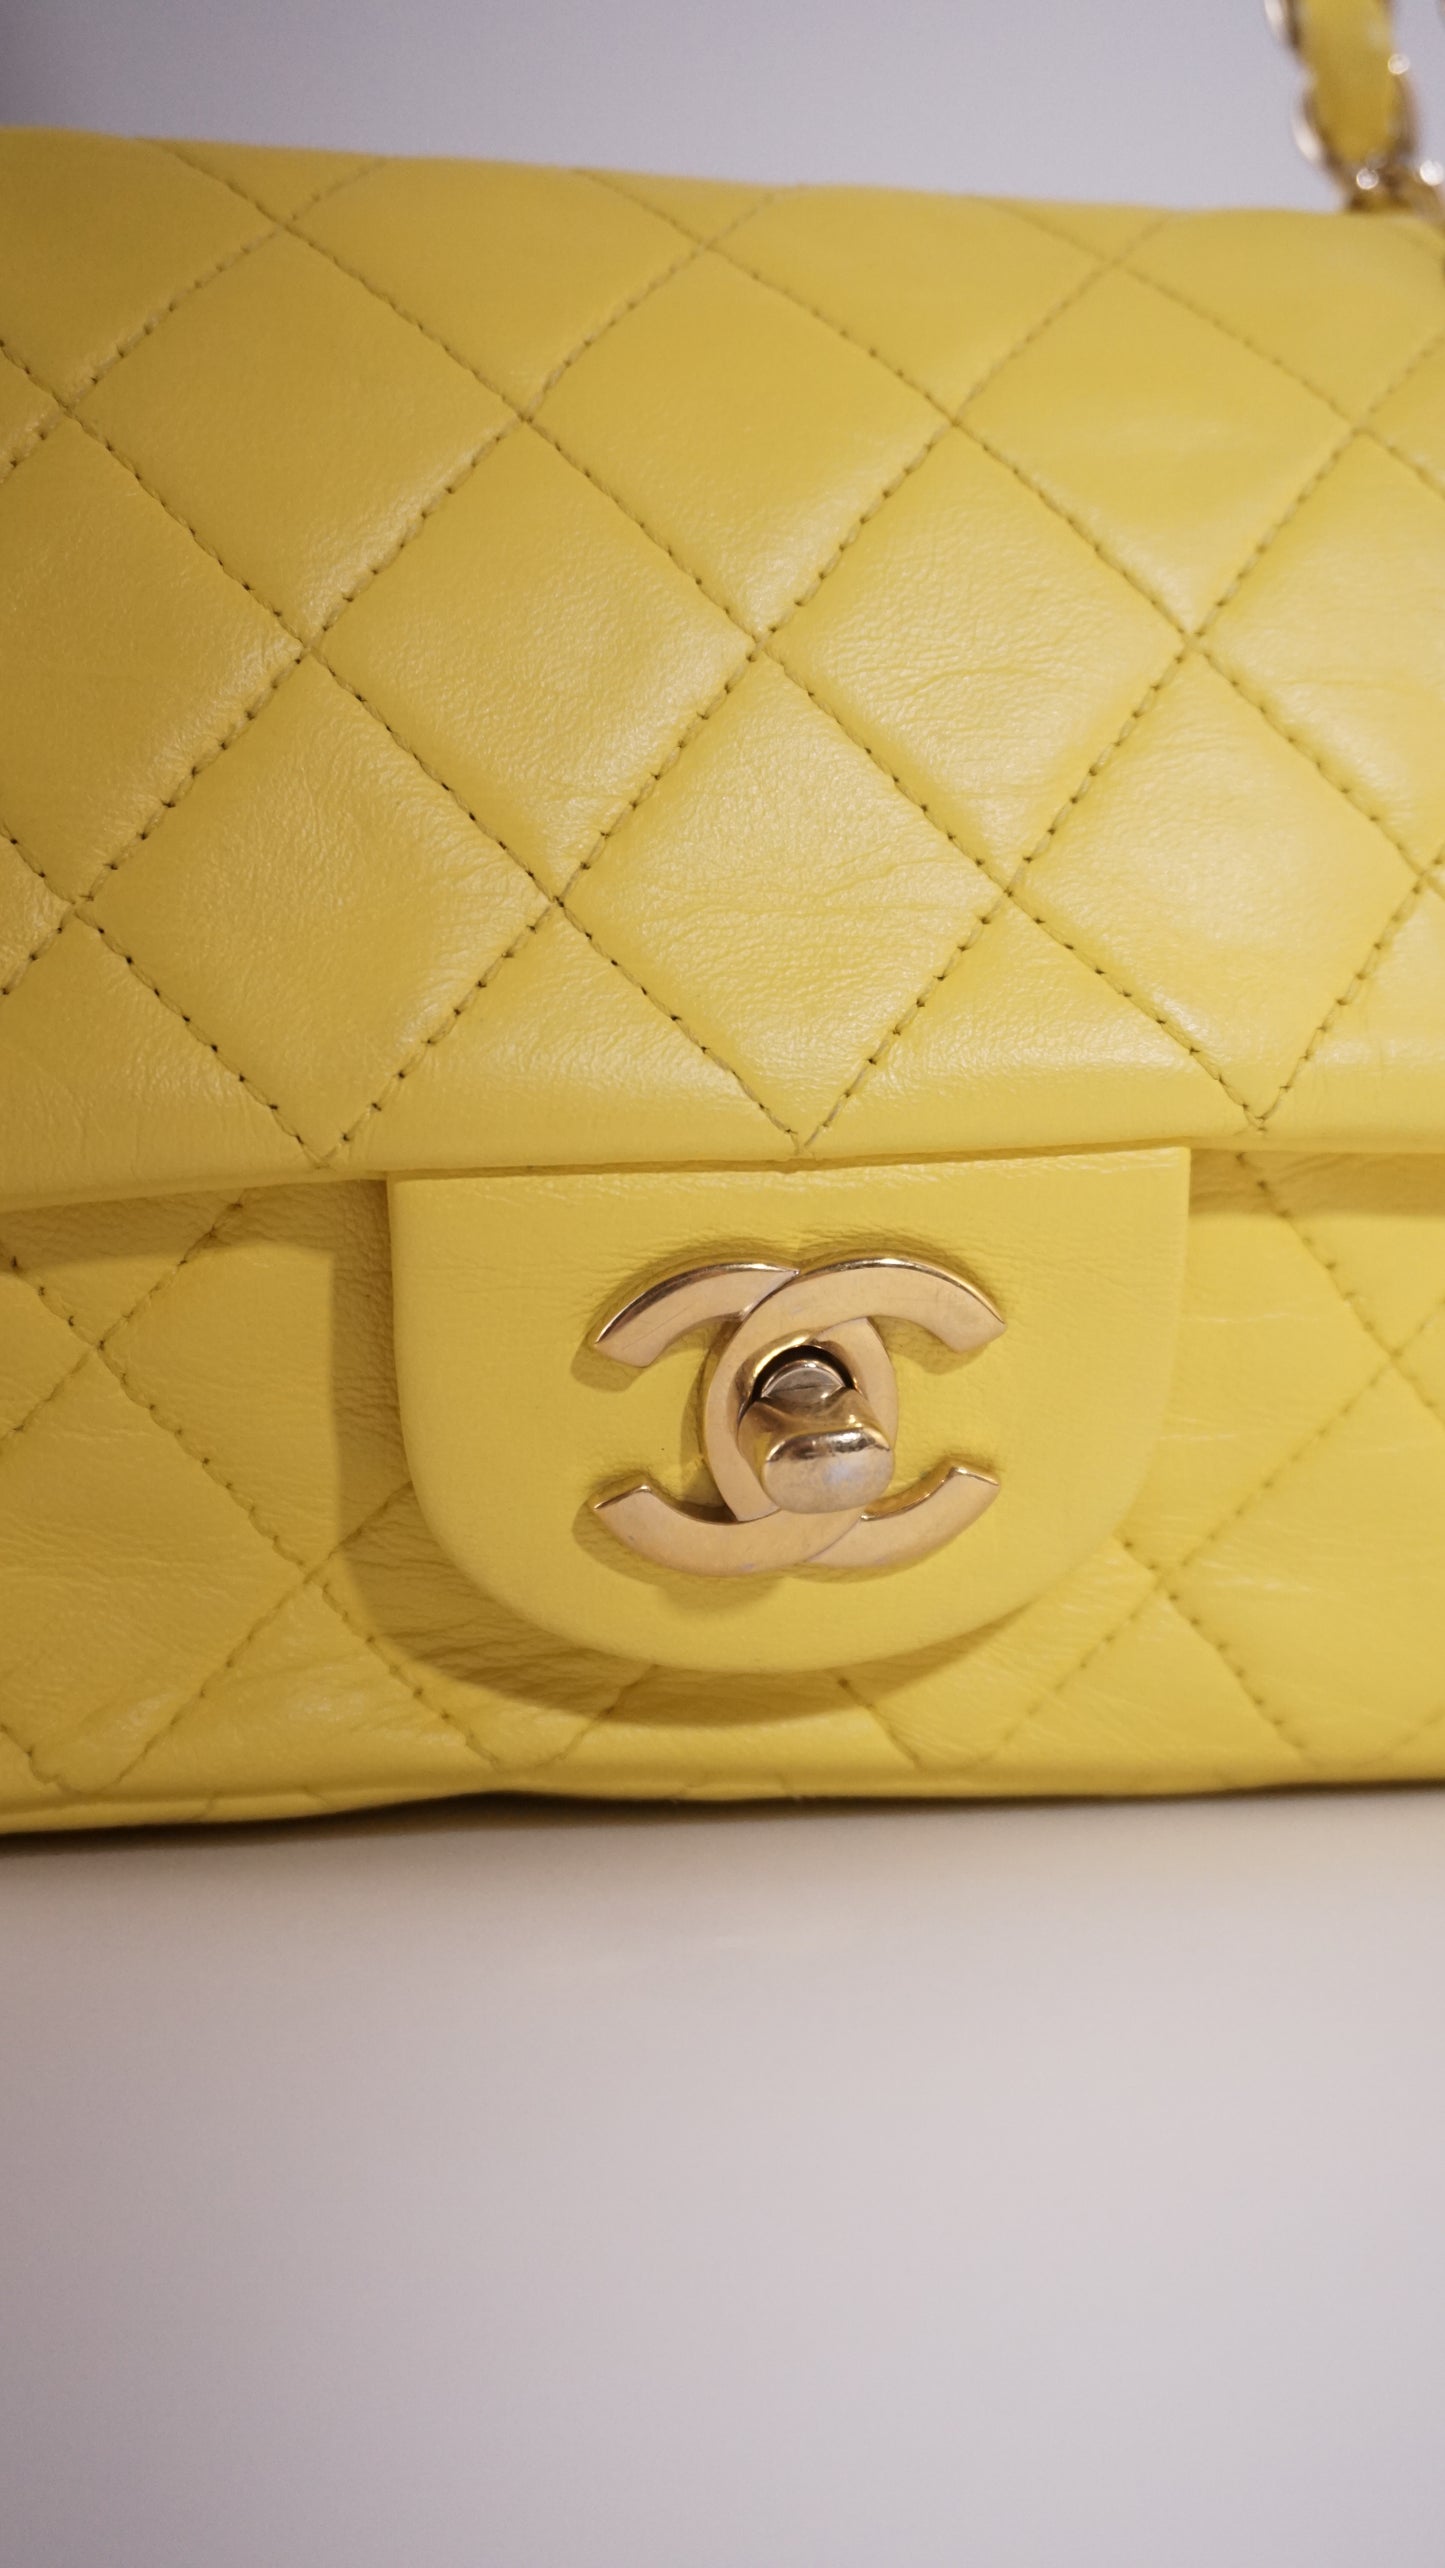 Chanel Lambskin Yellow Vintage Shoulder Bag Classic Flap Small